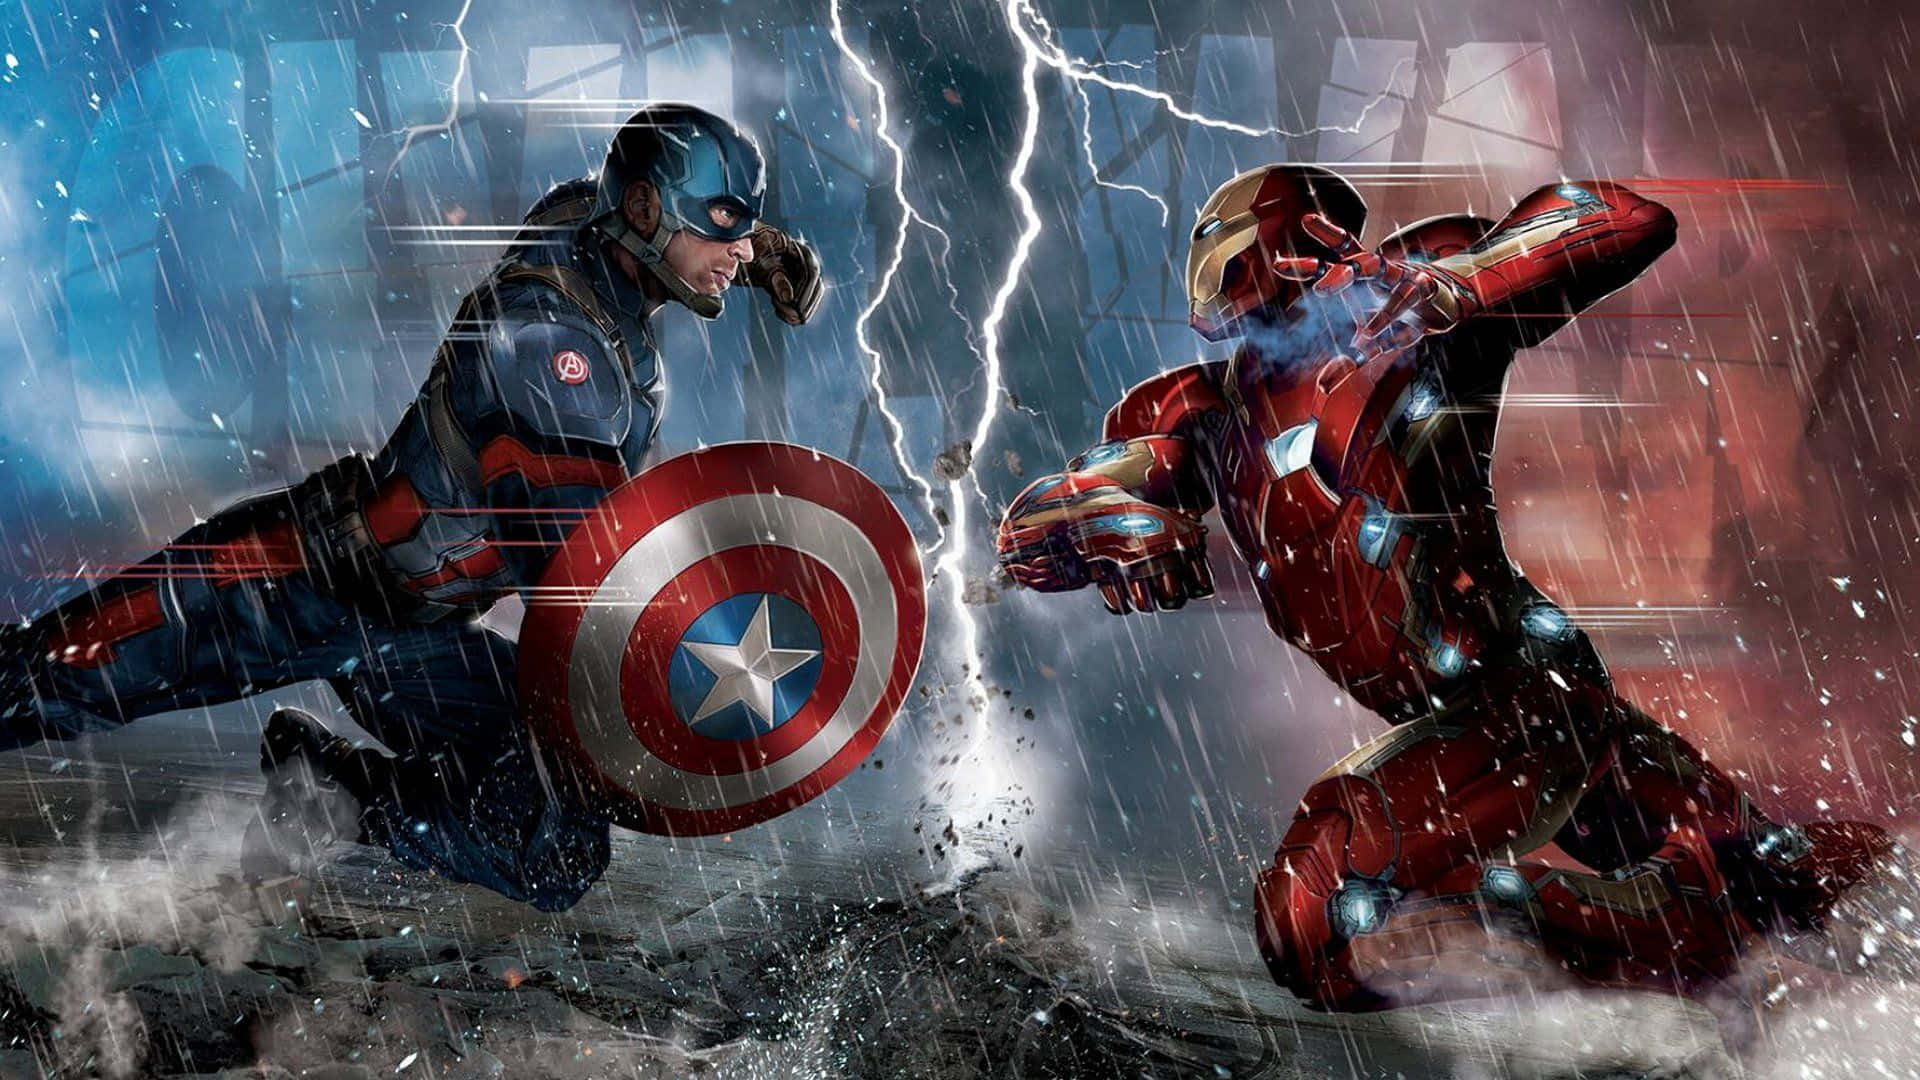 Marvel heroes live up to their namesake in this classic scene from a Marvel movie. Wallpaper